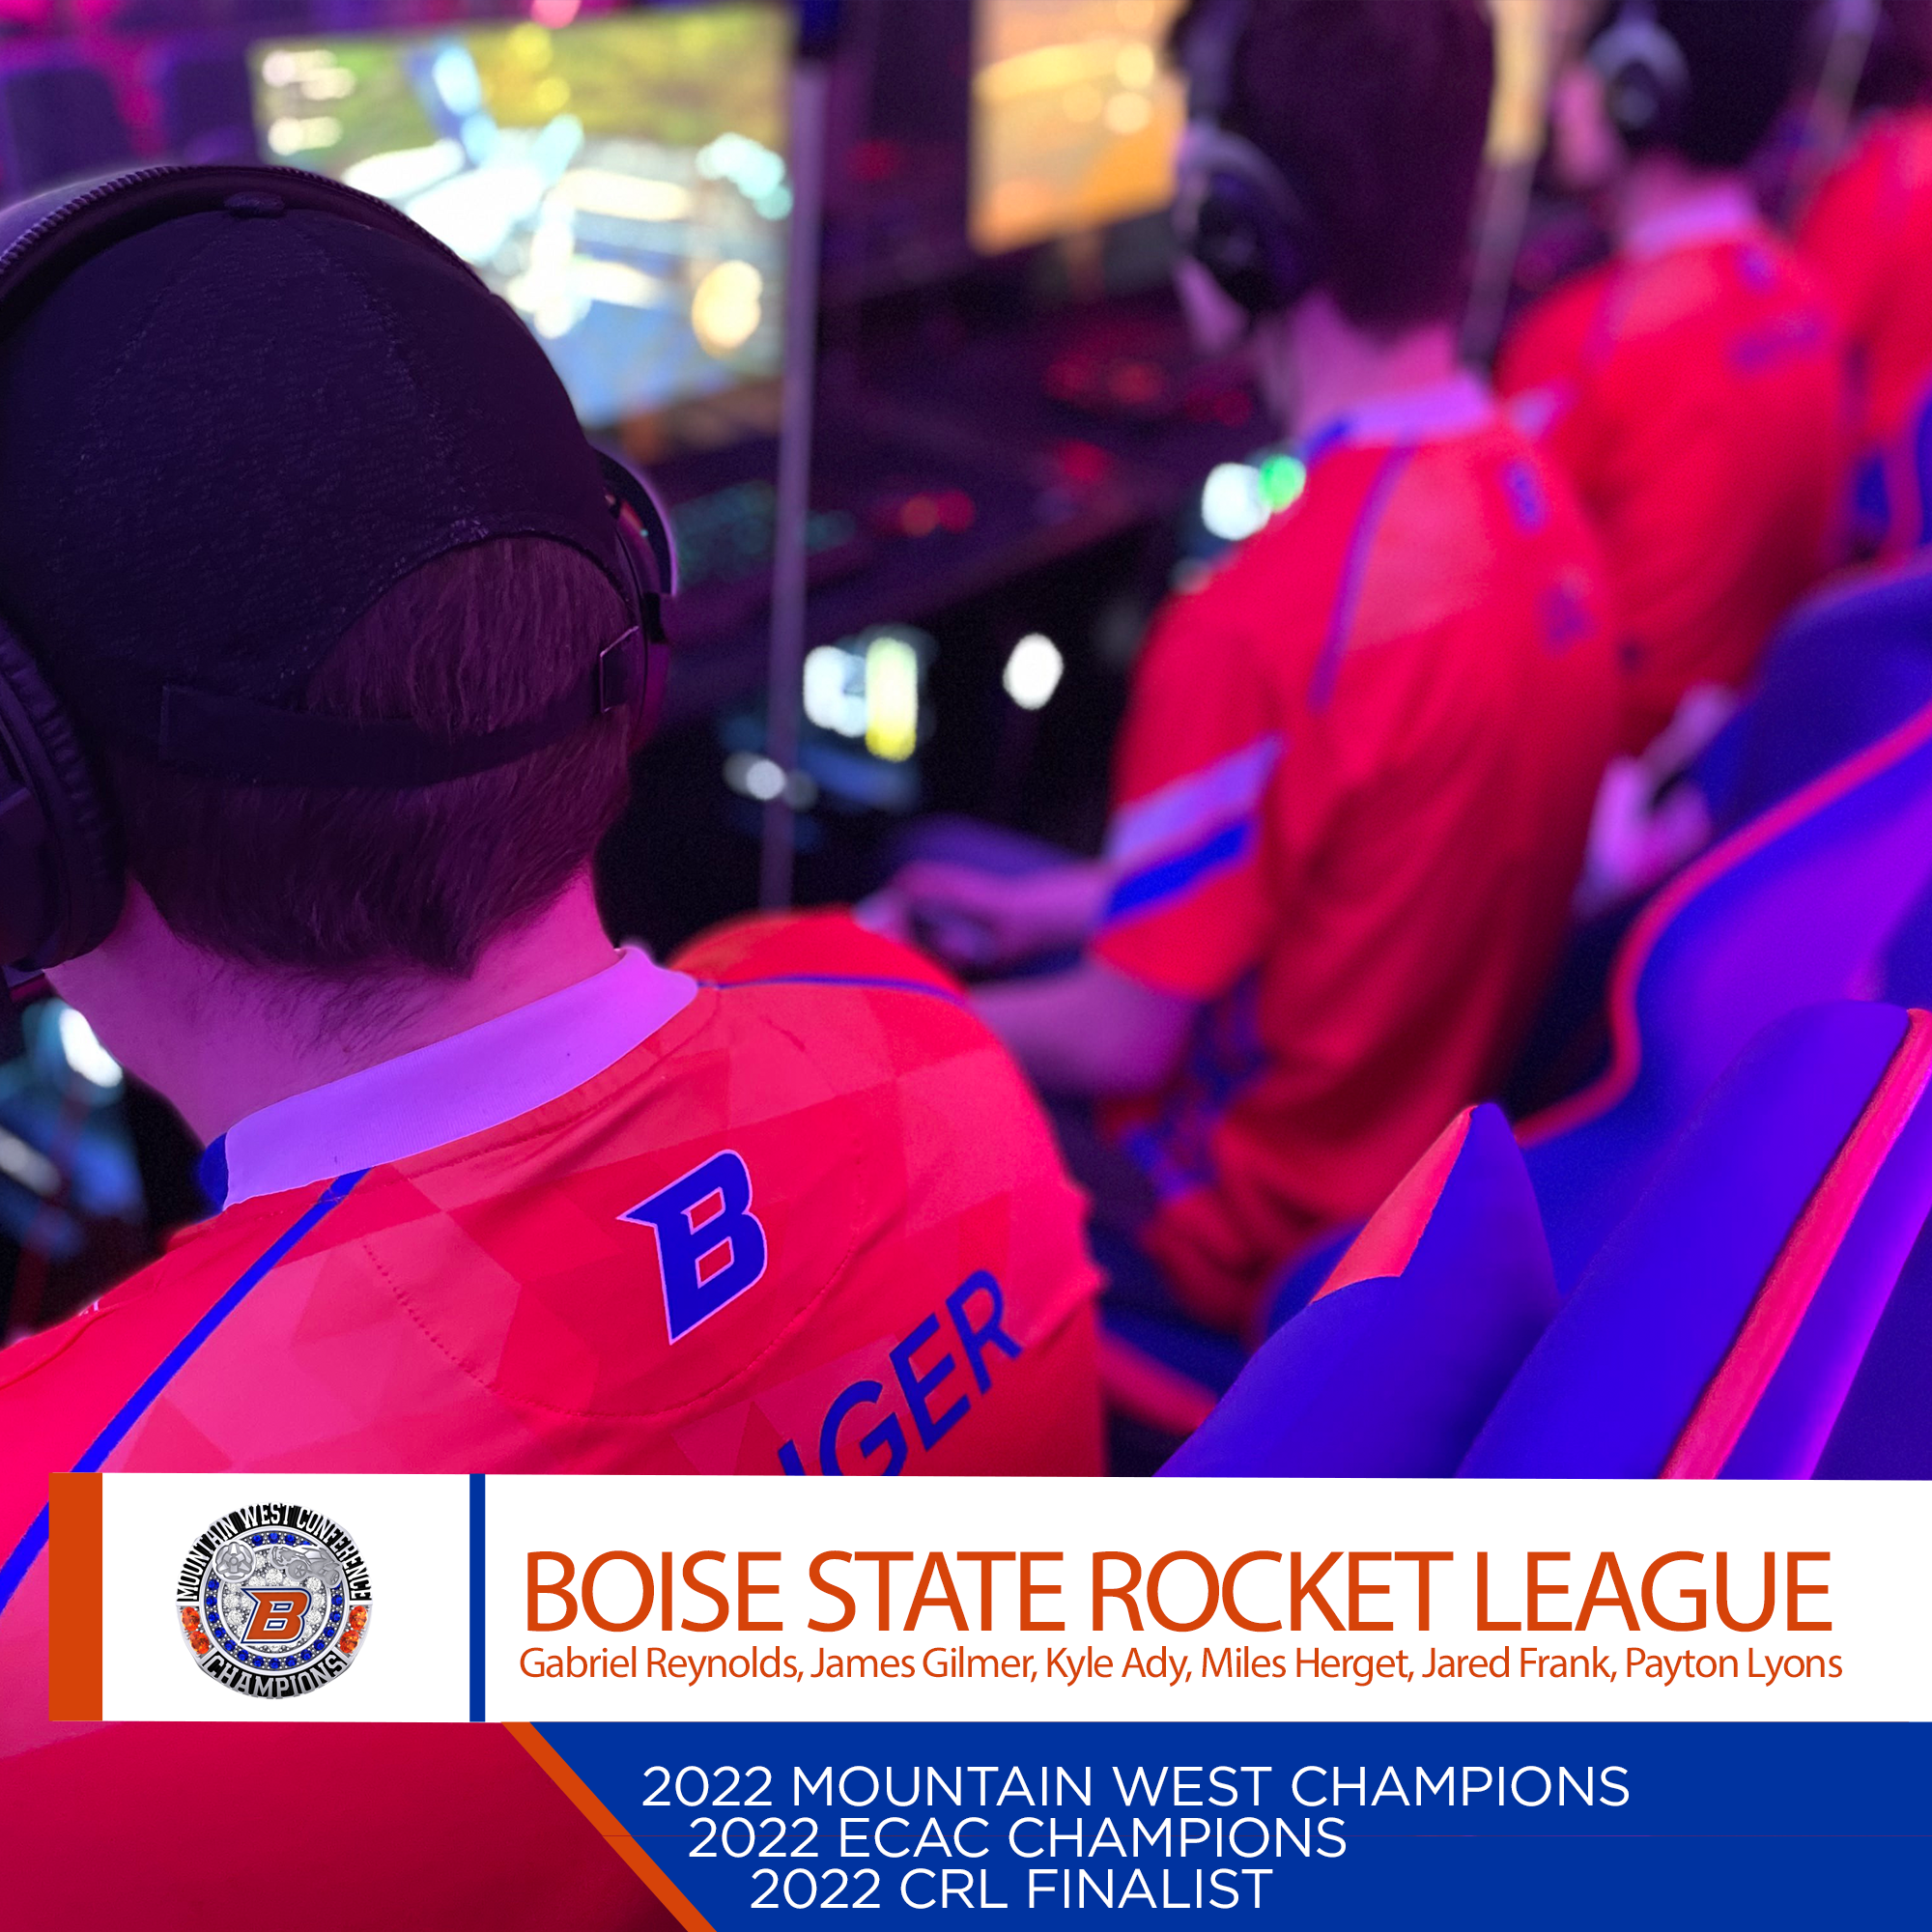 2022 proves to be banner year for Boise State Rocket League